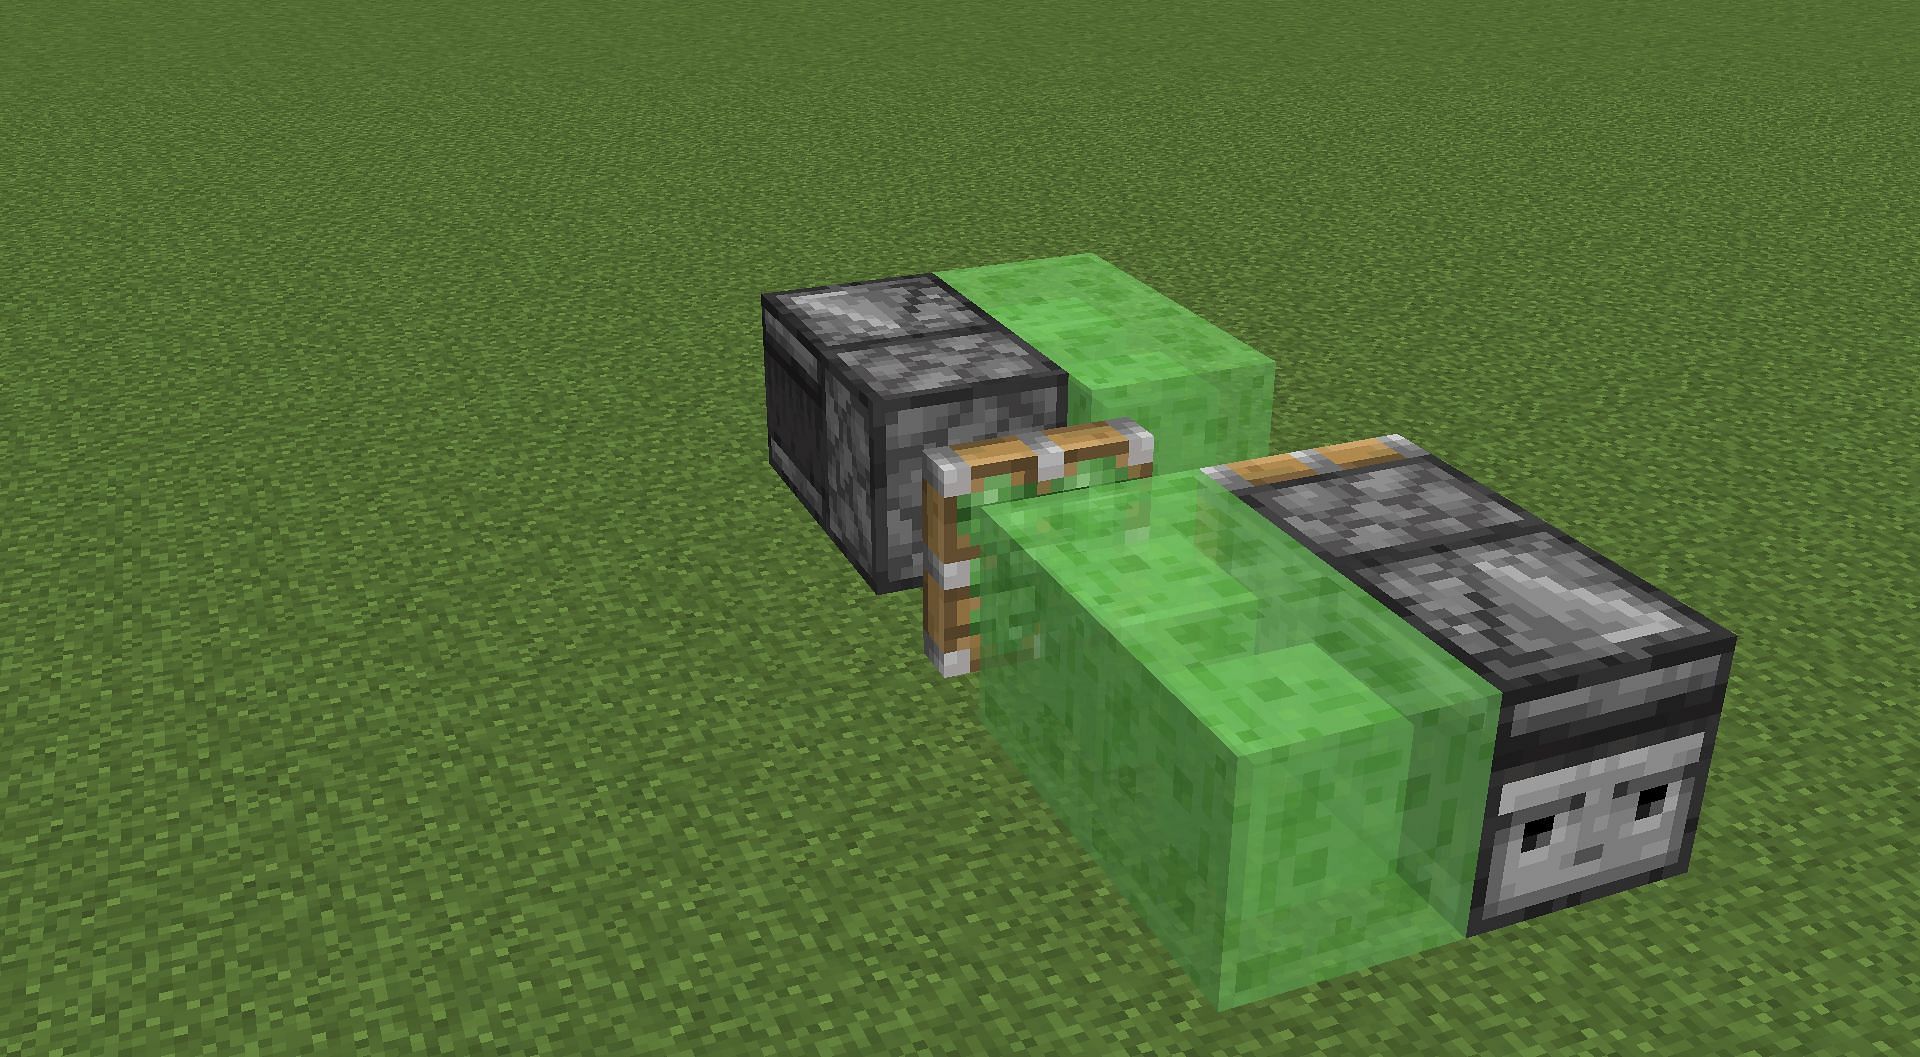 A simple flying machine on which players can stand and travel in Minecraft (Image via Mojang)